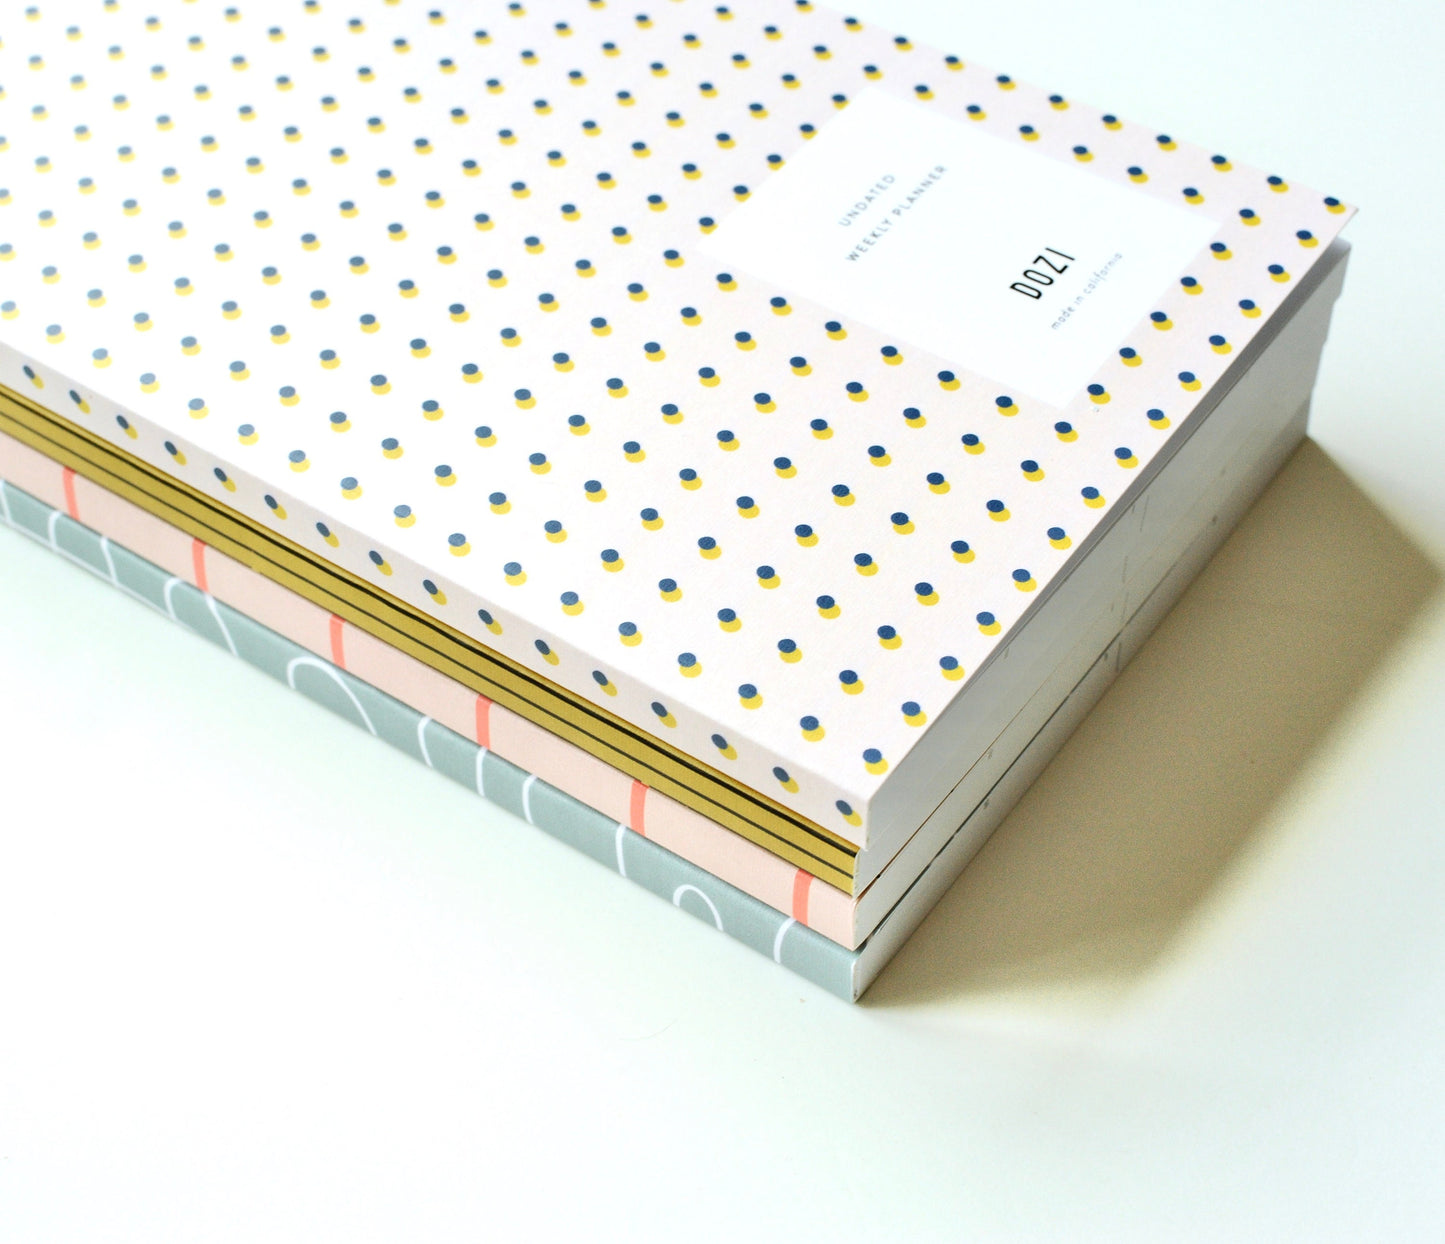 Undated Weekly Planner - Dots